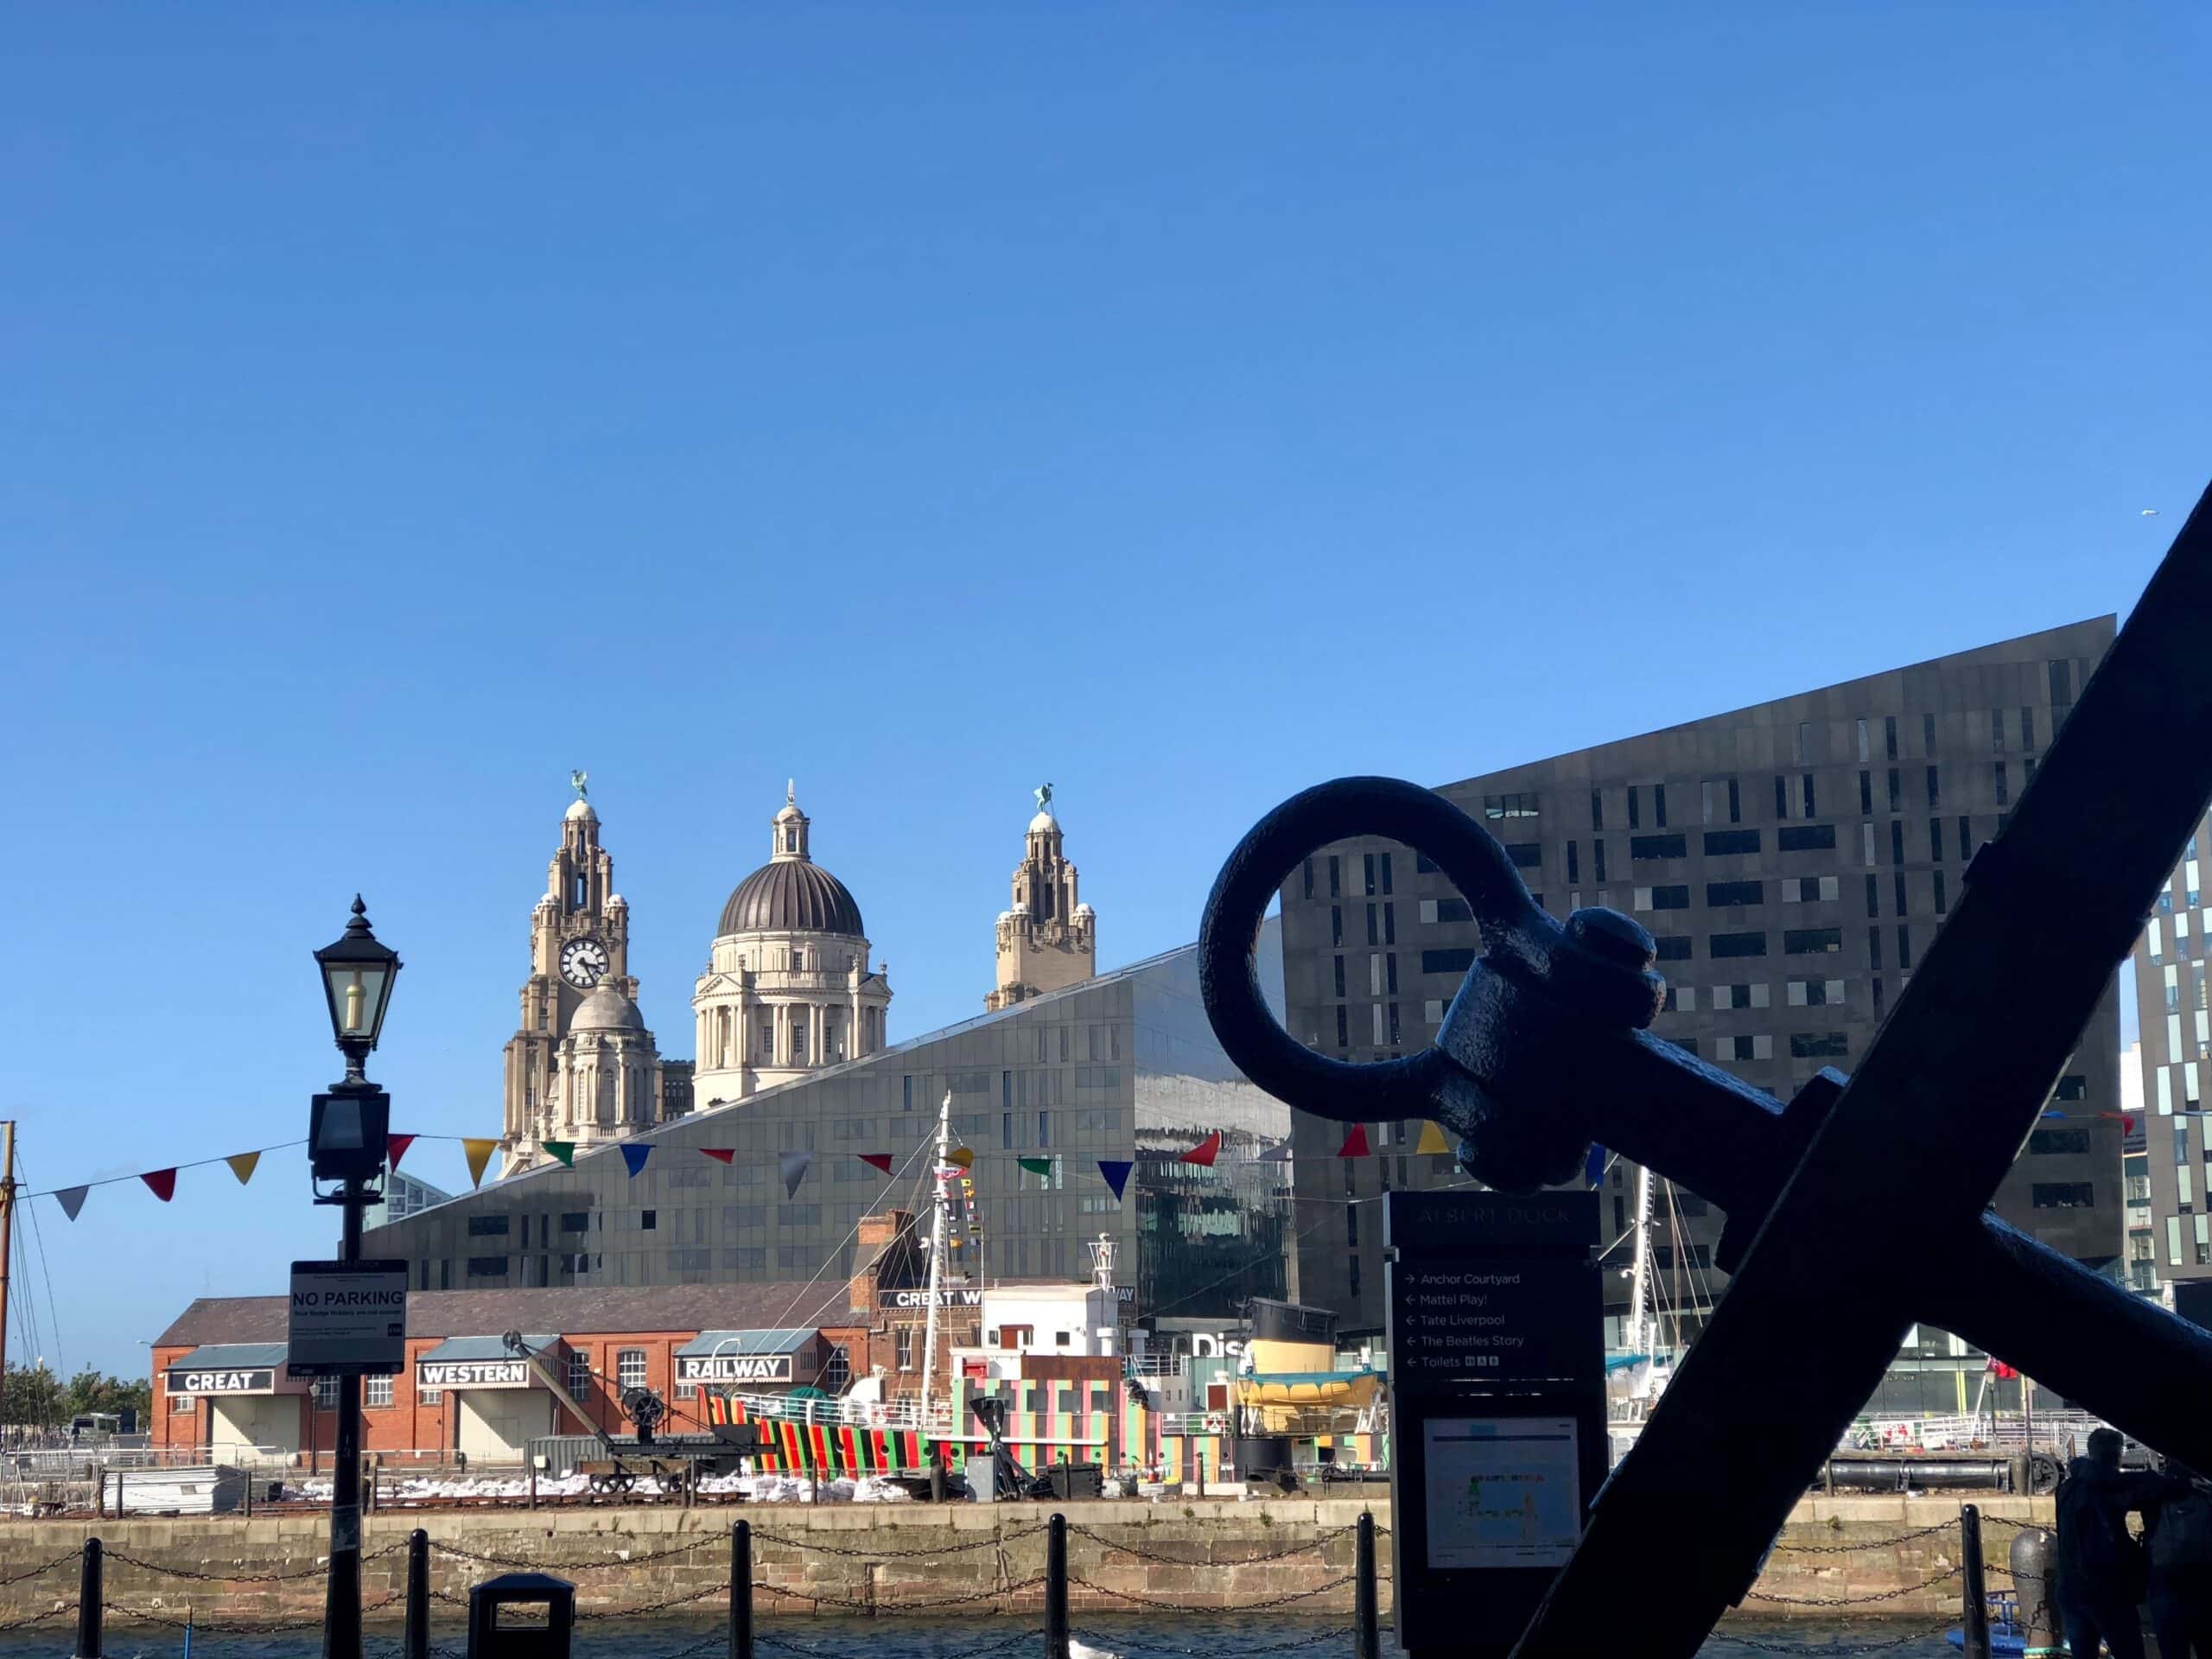 sunny view of liverpools famous liver birds and albert dock